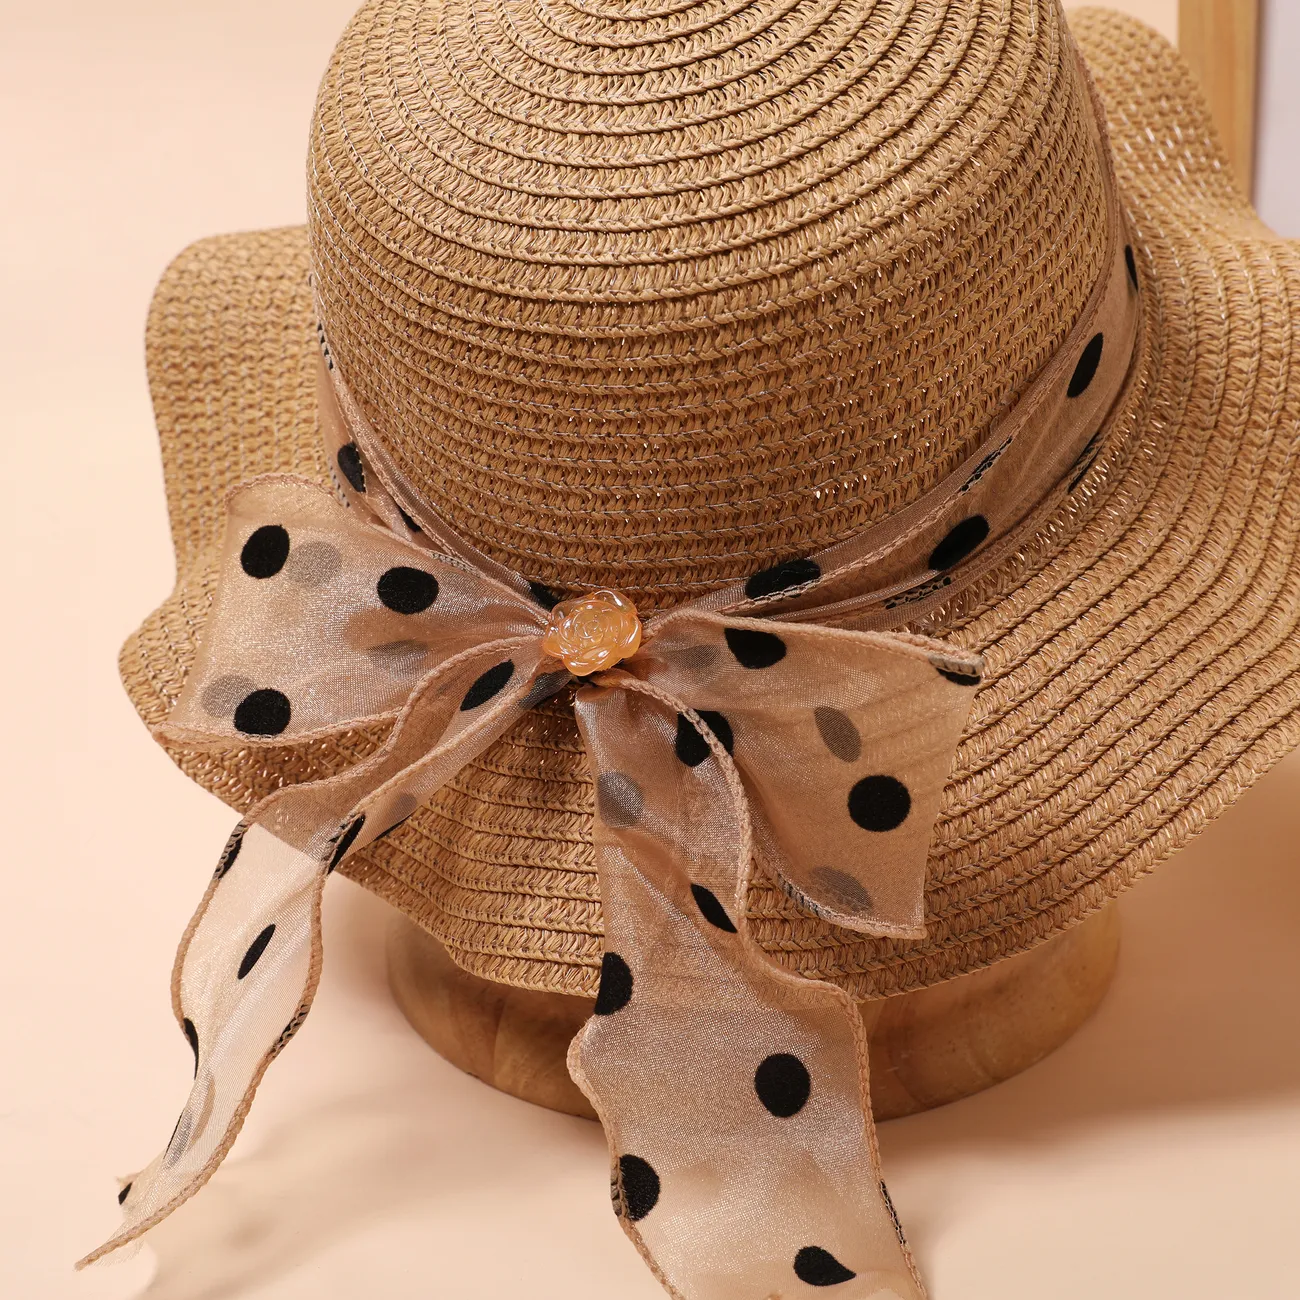 Summer Girls' Straw Hat with Polka Dot Ribbon for Beach and Sun Protection, Ages 2-5 Khaki big image 1